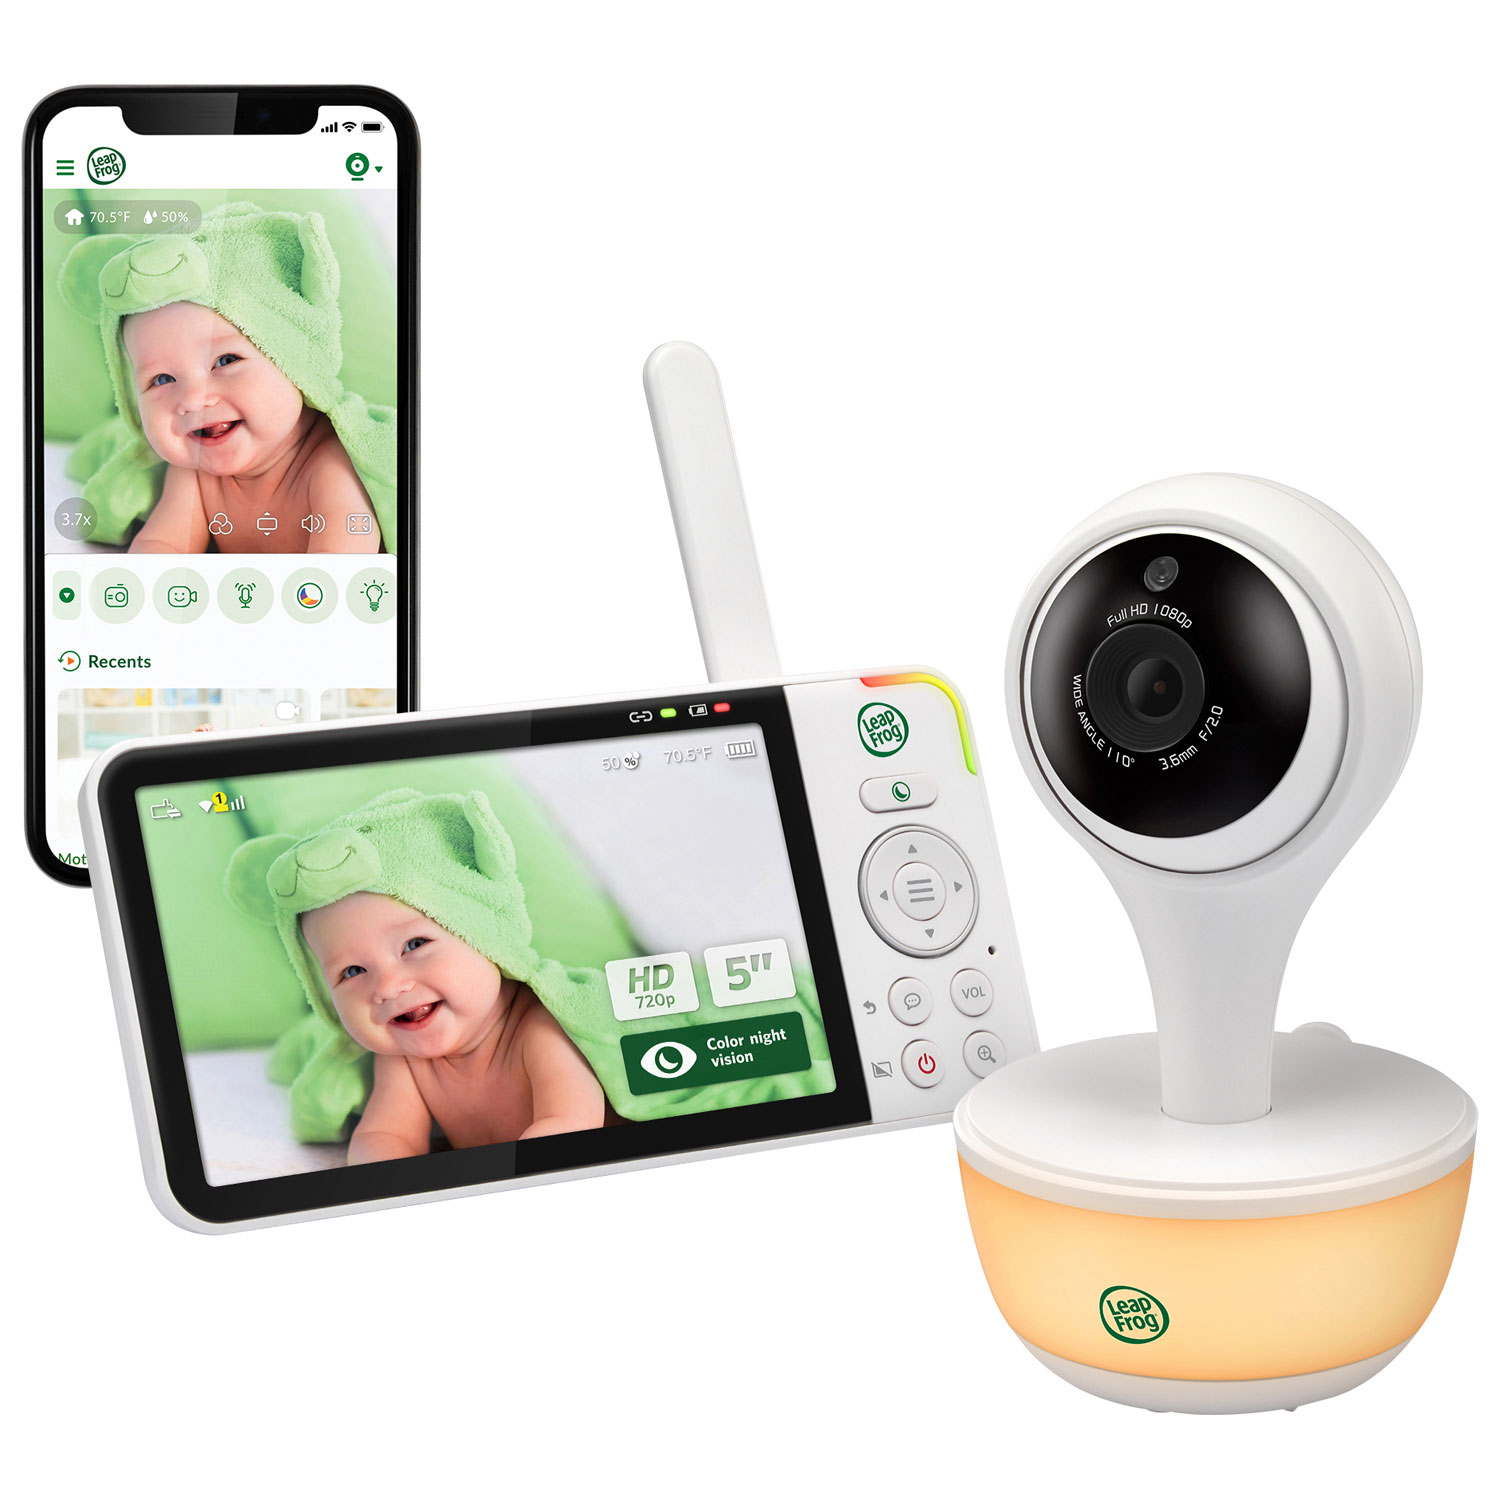 LeapFrog 5" Video Wi-Fi Baby Monitor with Night Vision, Zoom & 2-Way Audio (LF815HD)